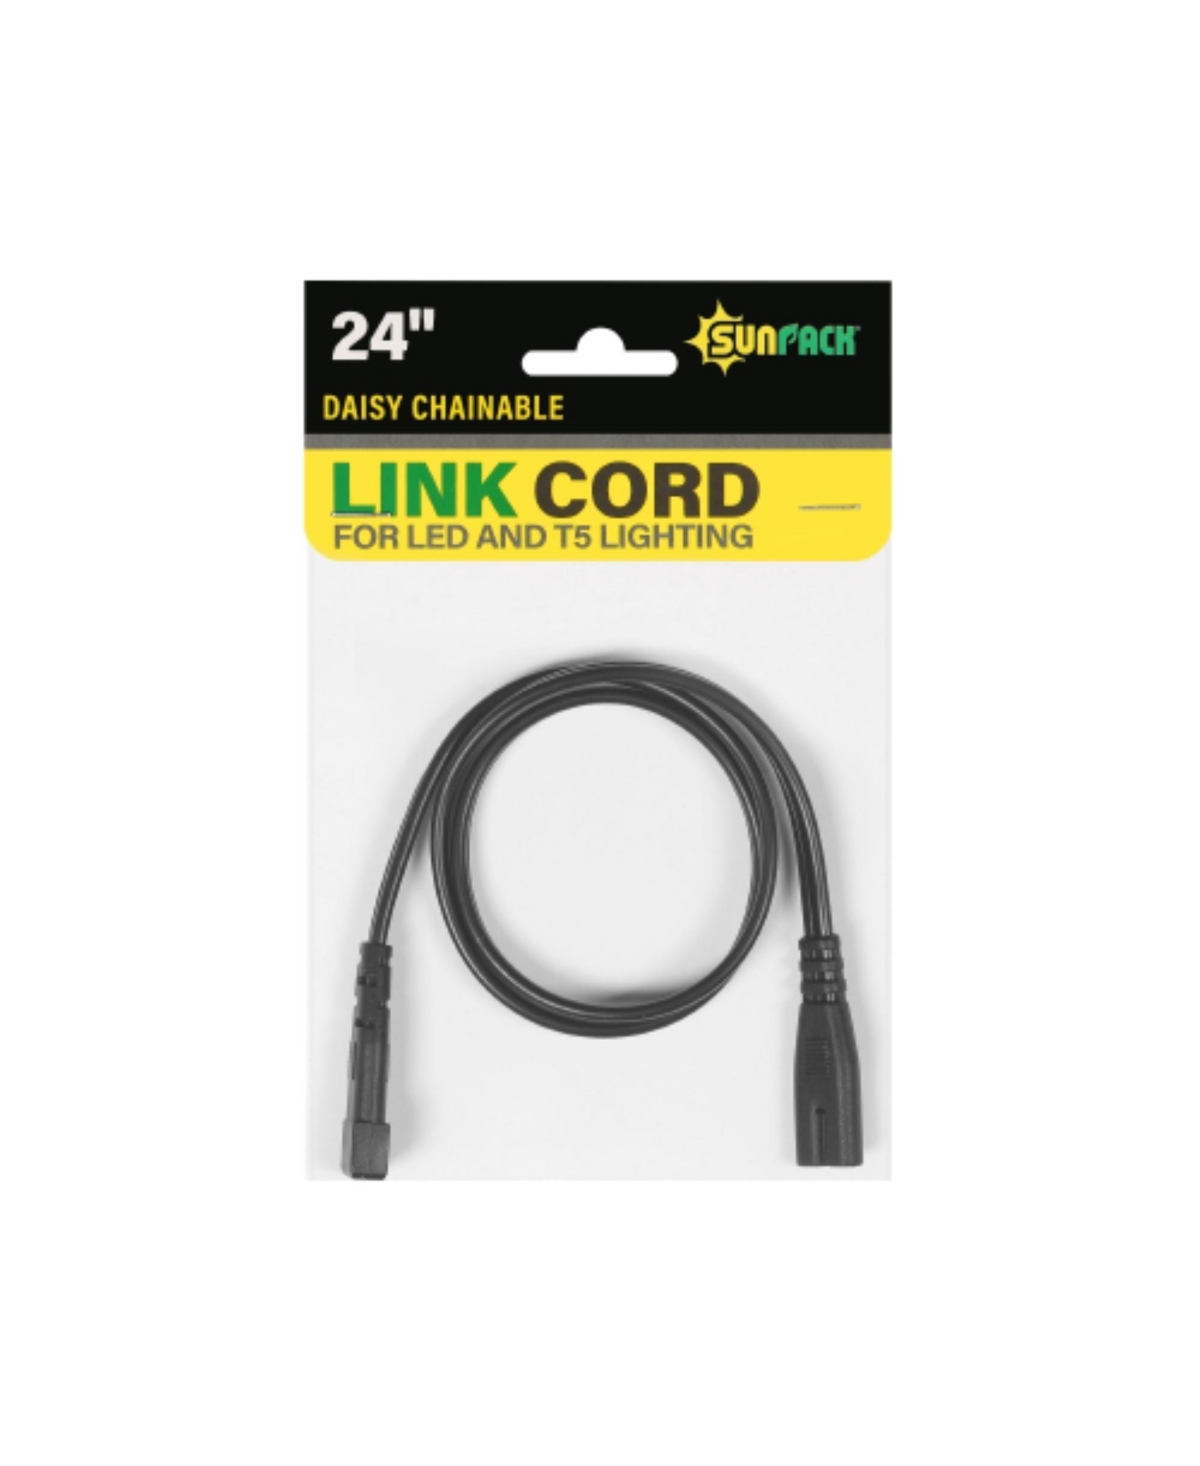 Daisy Chainable Link Cord for Led and T5 Lighting, 24 Inches - Black